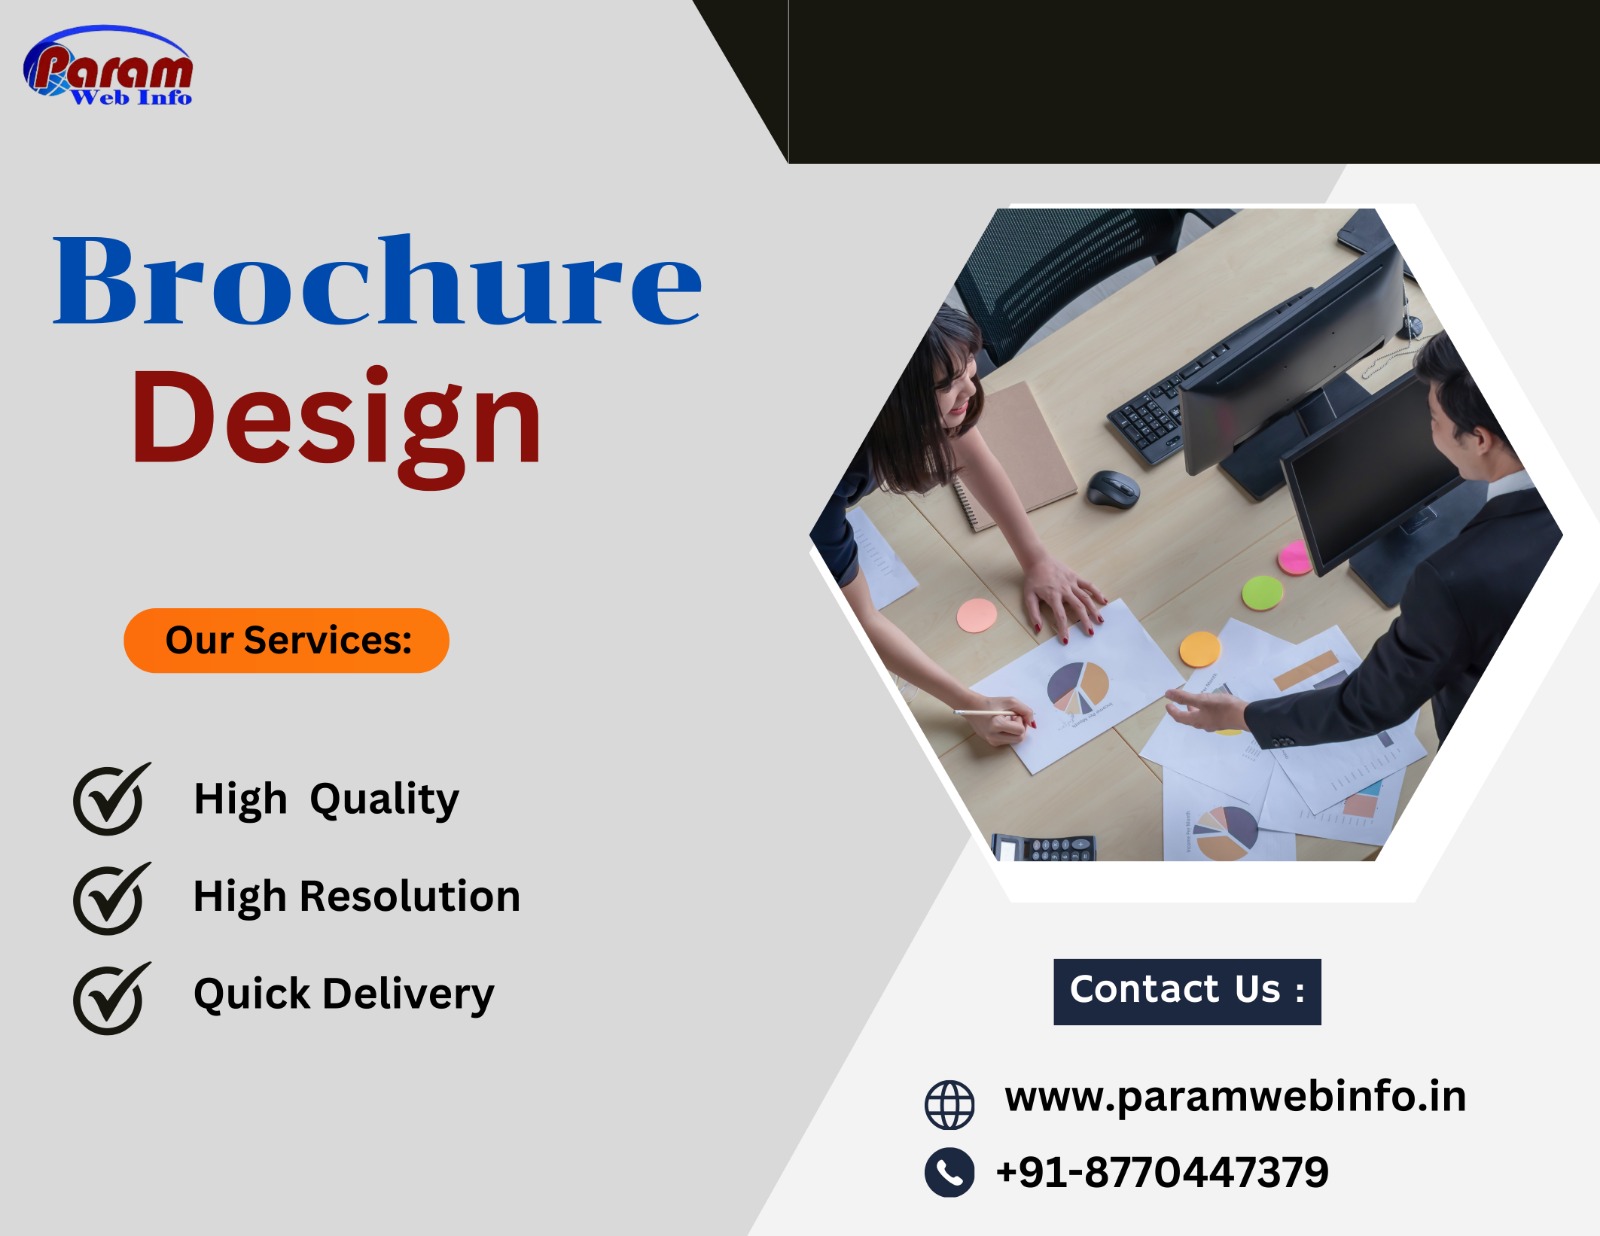 When it comes to designing a brochure, the main features you'll want to focus on include: by paramwebinfo Raipur Chhattisgarh